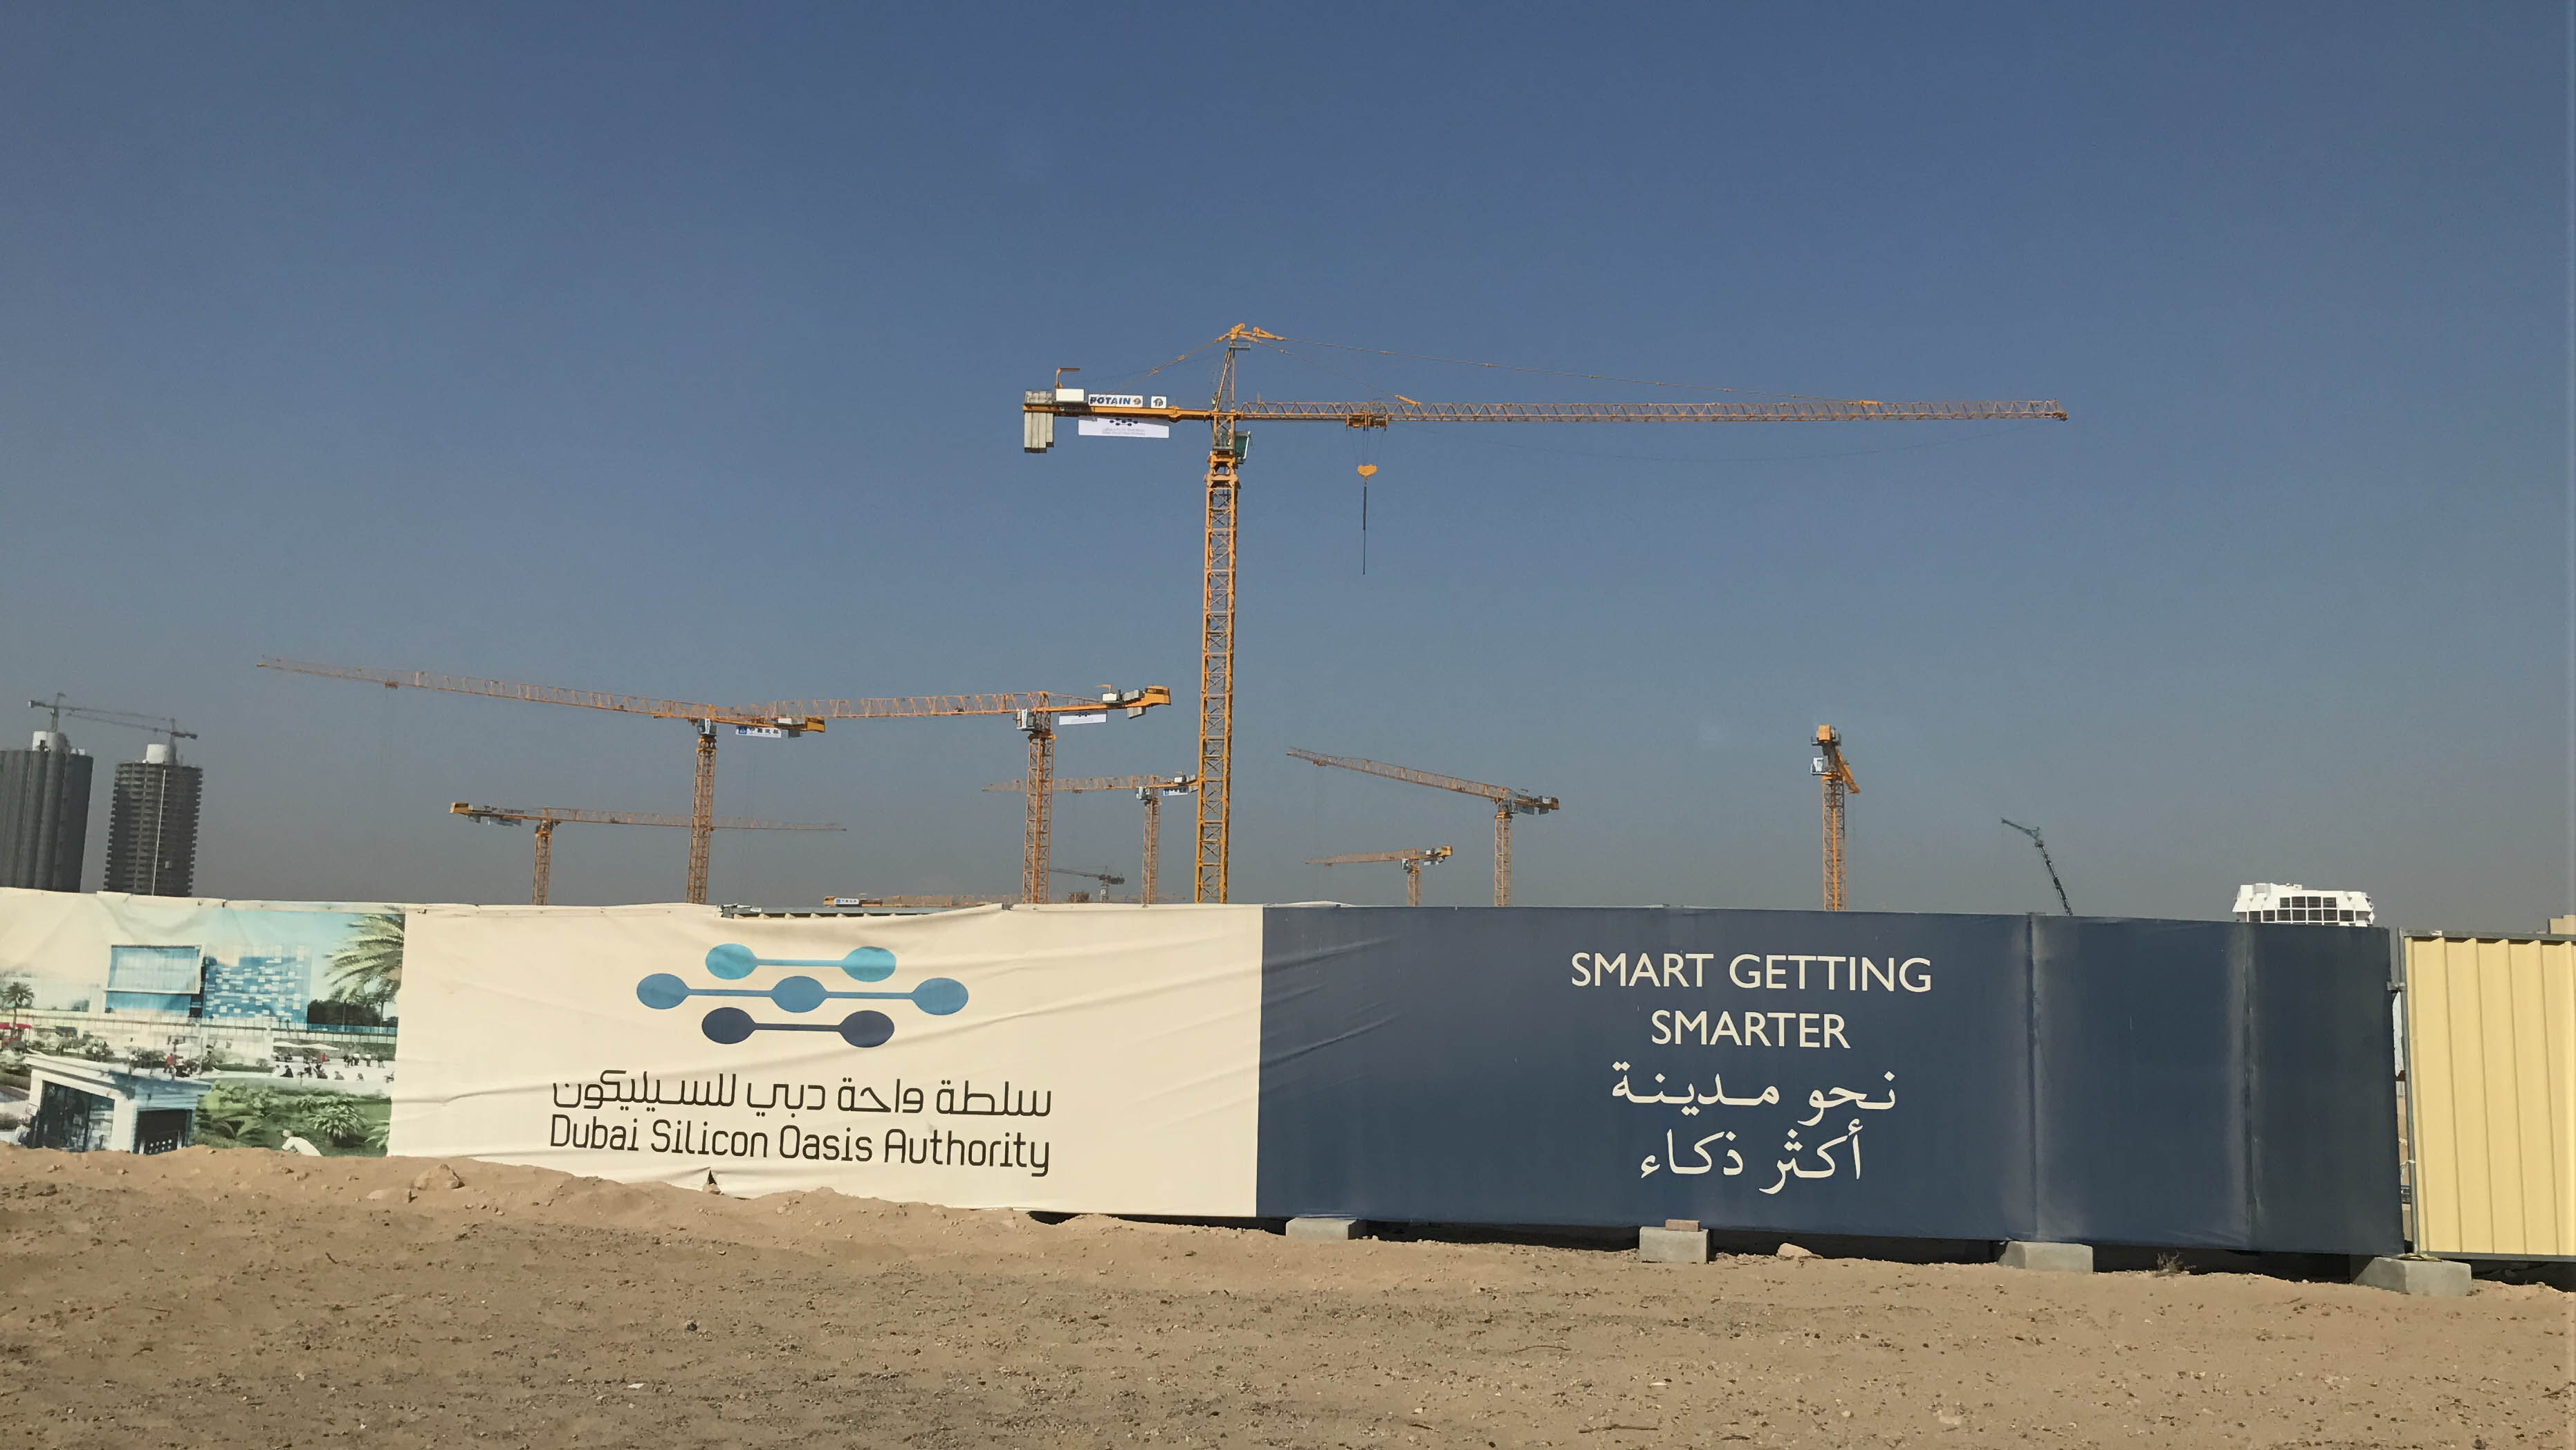 NFT supplies Potain cranes to new tech hub in the Middle East 1